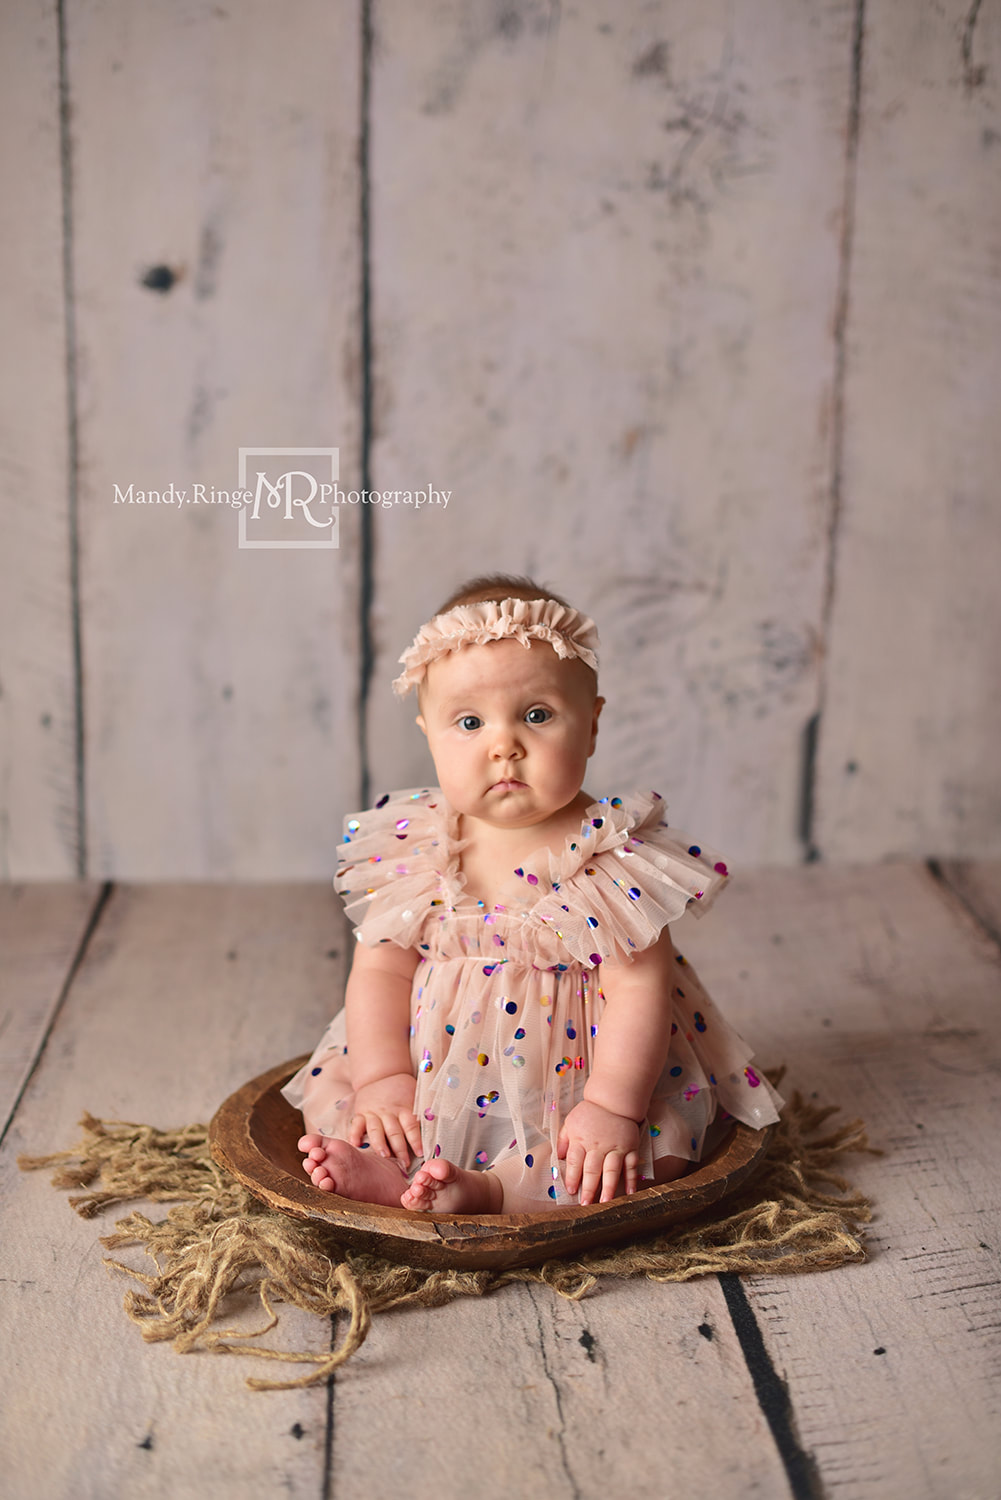 Milestone Session // Girl sitter session, 6 to 12 months, Celebrate dress from Cora & Violet, Backdrop from Intuitions Backdrops // St. Charles, IL studio // Mandy Ringe Photography